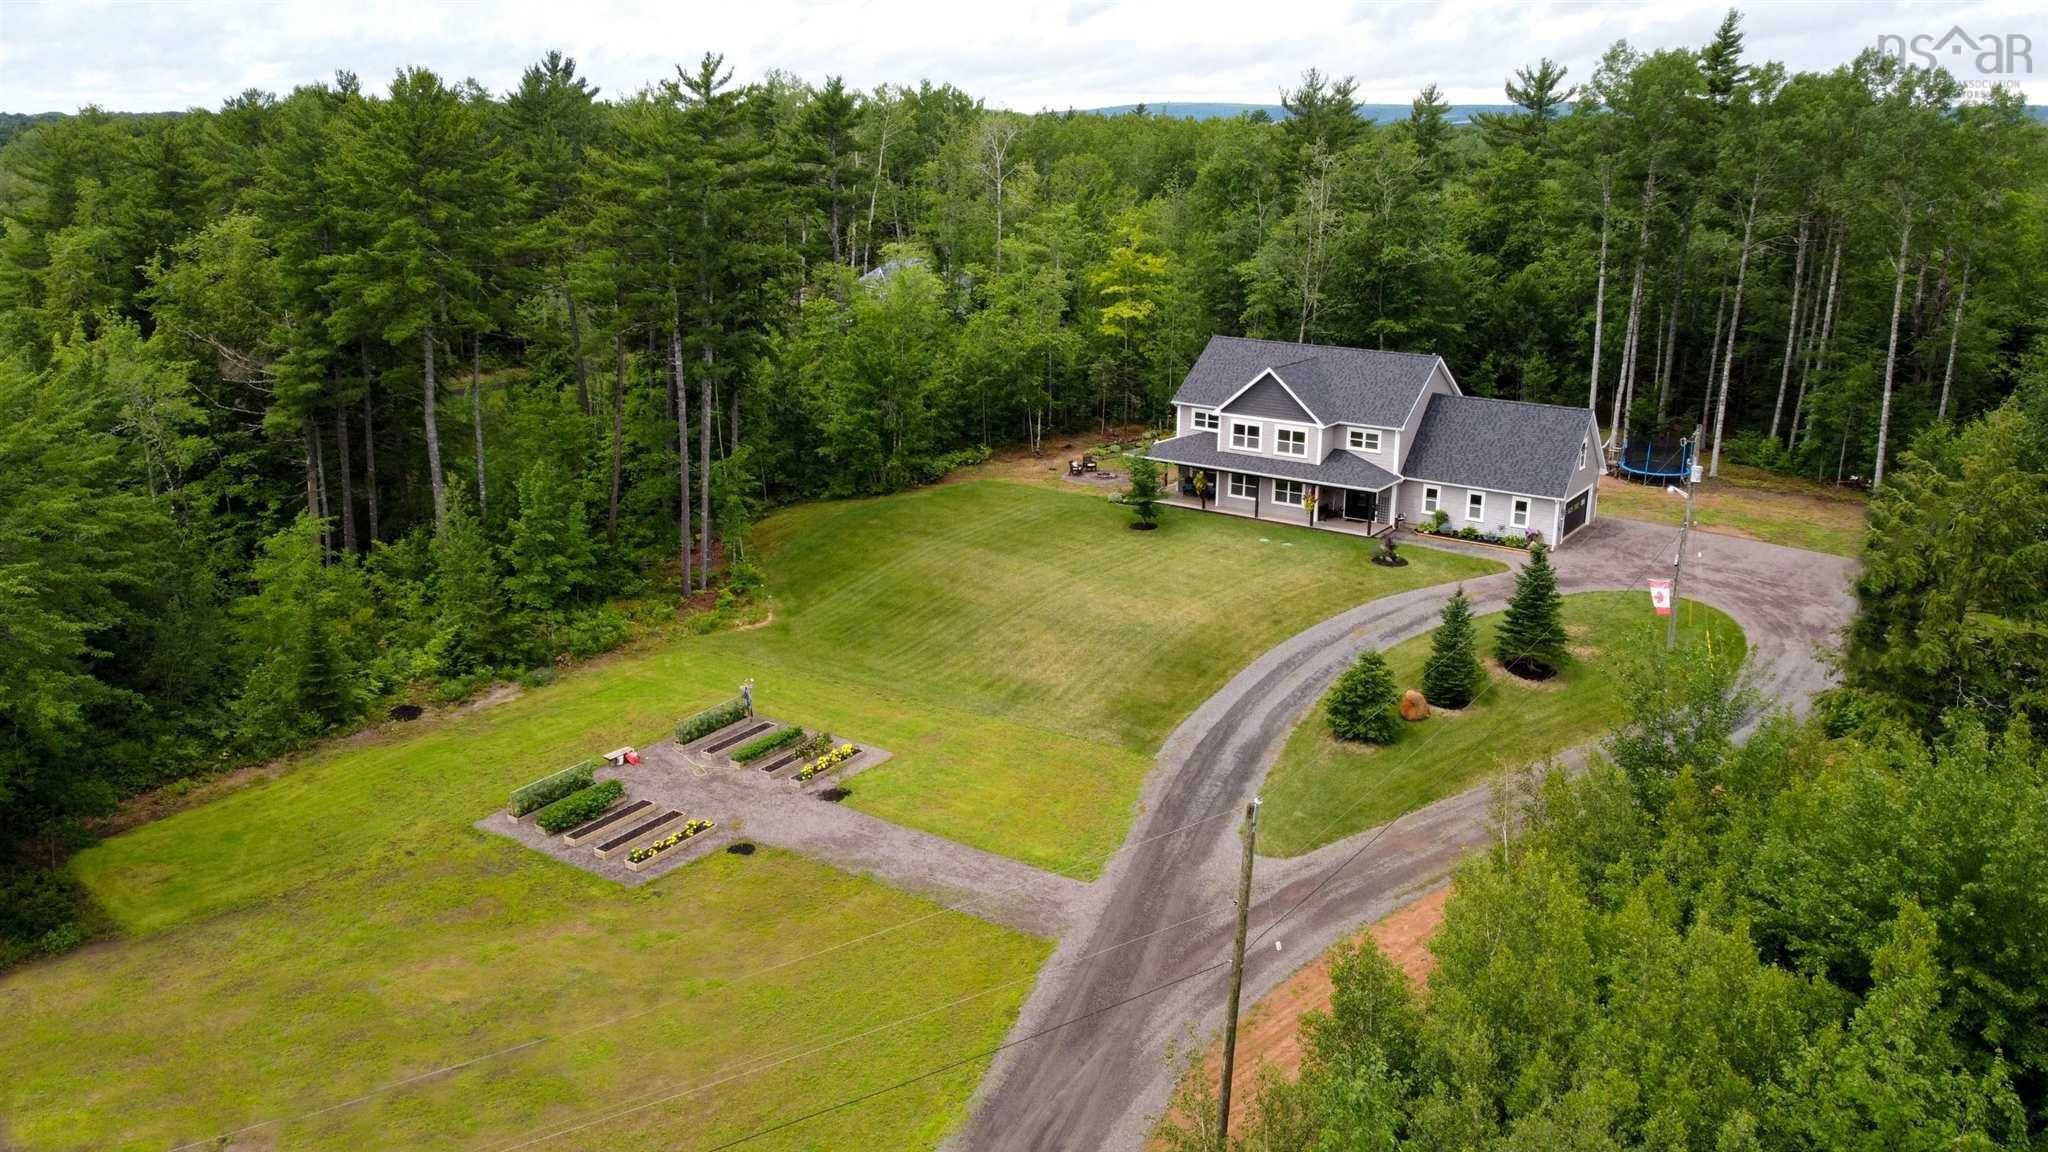 Main Photo: 561 Hall Road in Millville: 404-Kings County Residential for sale (Annapolis Valley)  : MLS®# 202120321